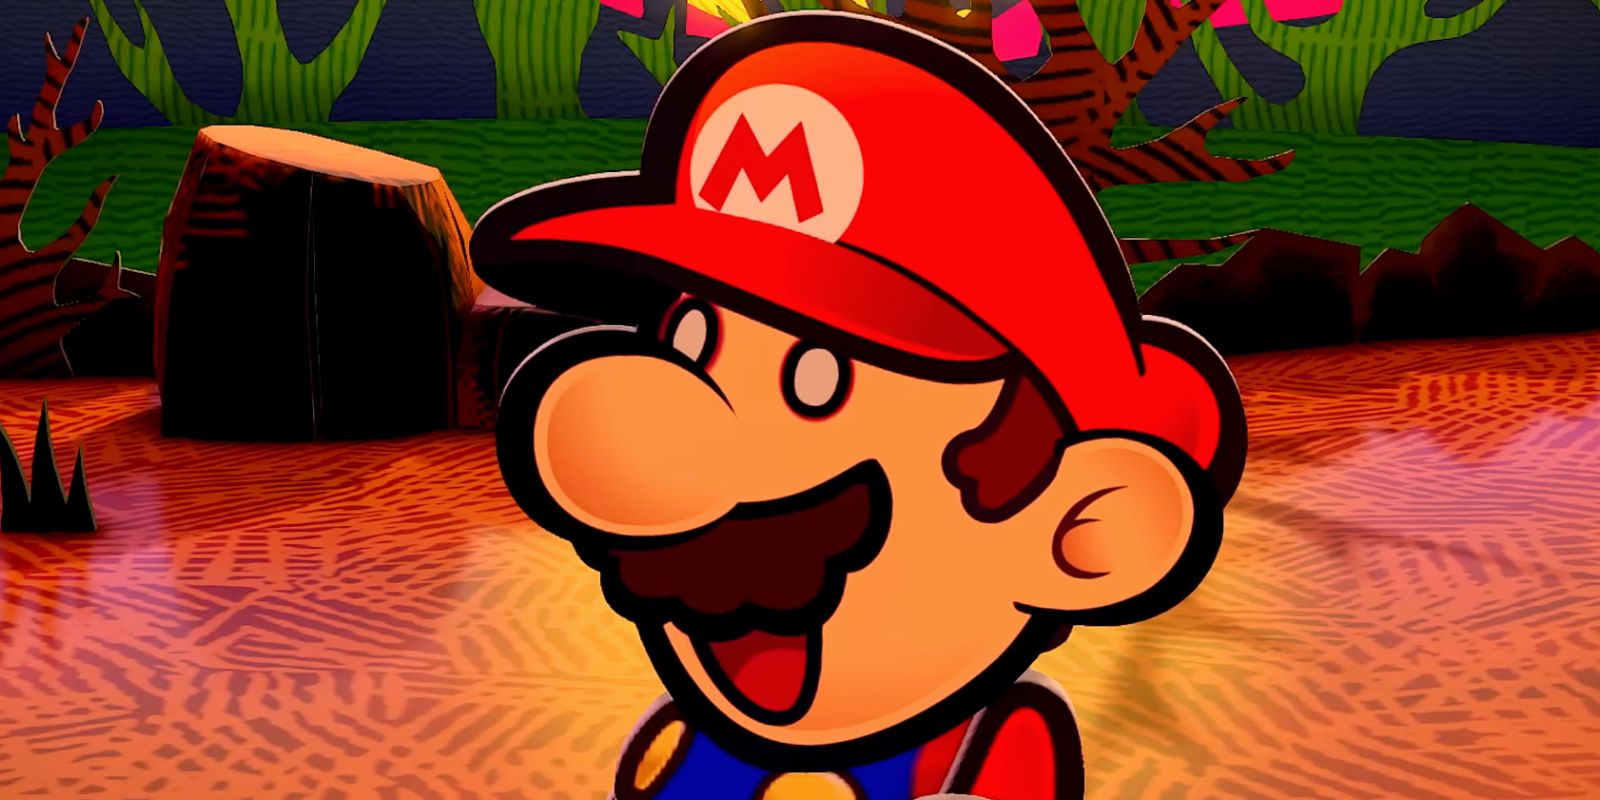 Mario with a shocked expression in Paper Mario: The Thousand-Year Door.